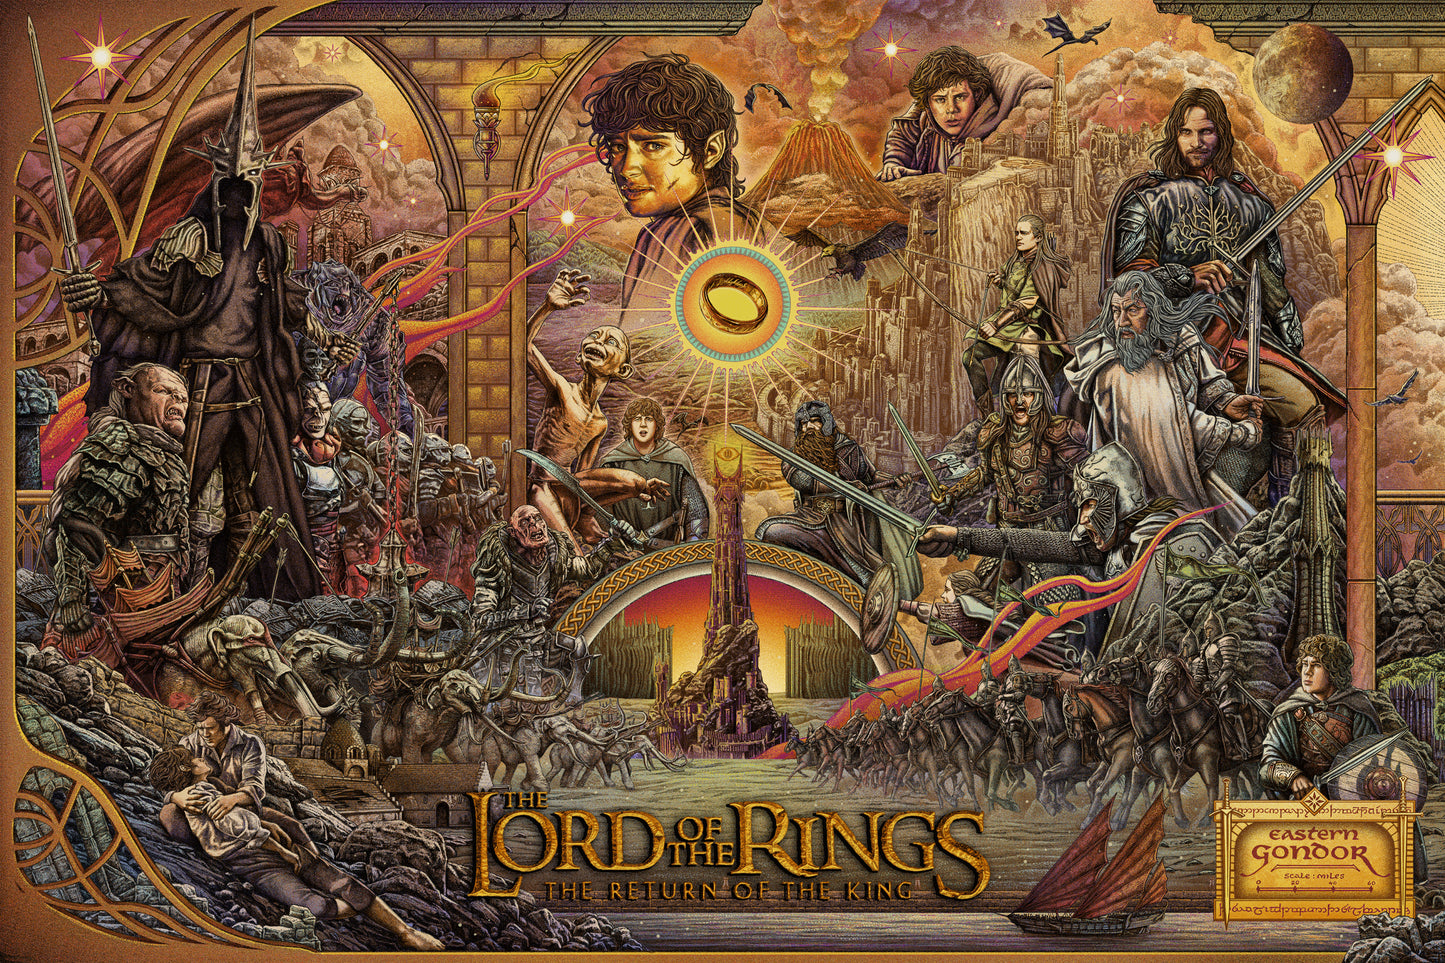 Ise Ananphada "The Lord of the Rings: The Return of the King"